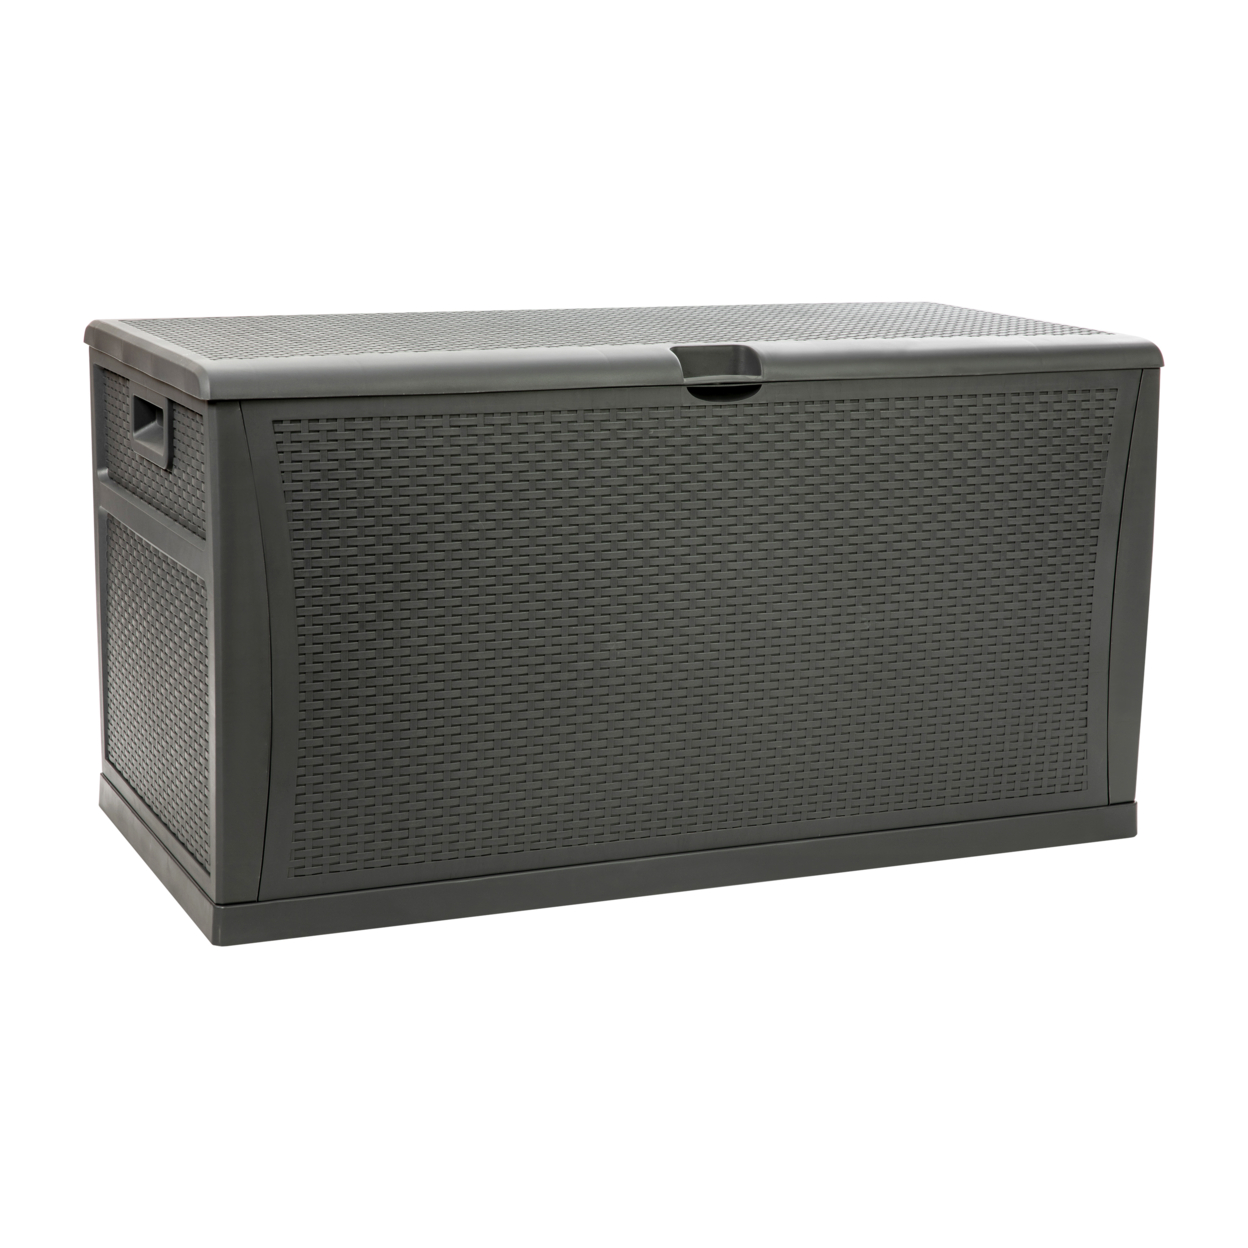 120 Gallon Plastic Deck Box - Outdoor Waterproof Storage Box For Patio Cushions, Garden Tools And Pool Toys, Gray